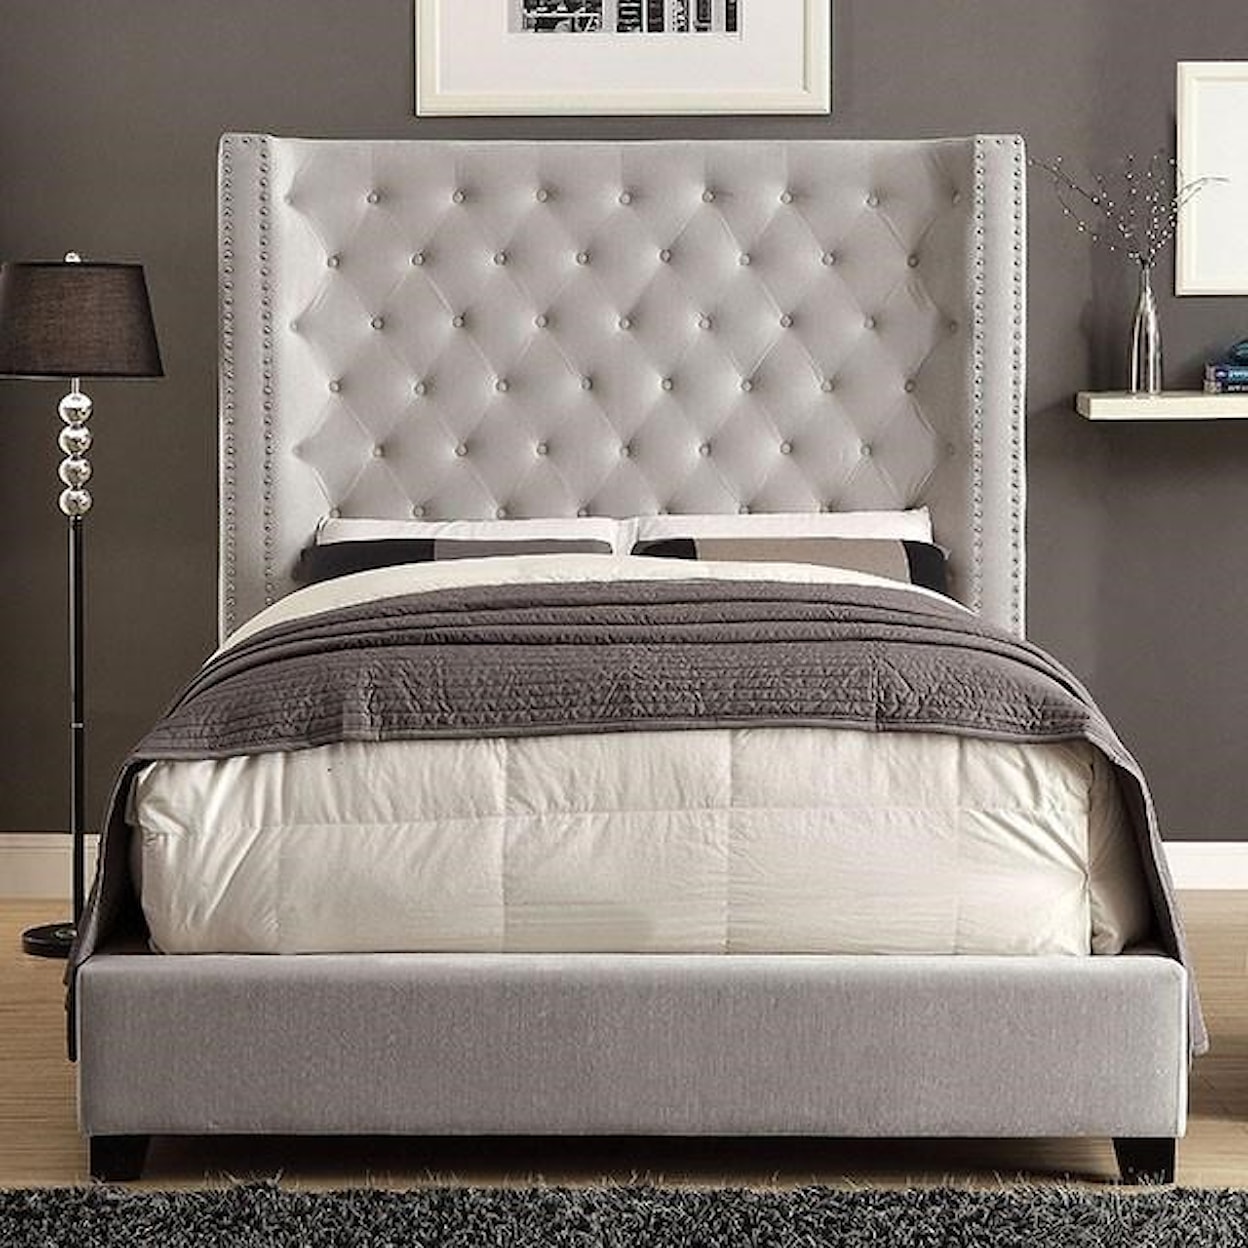 Furniture of America CM7679 Mirabelle King Bed